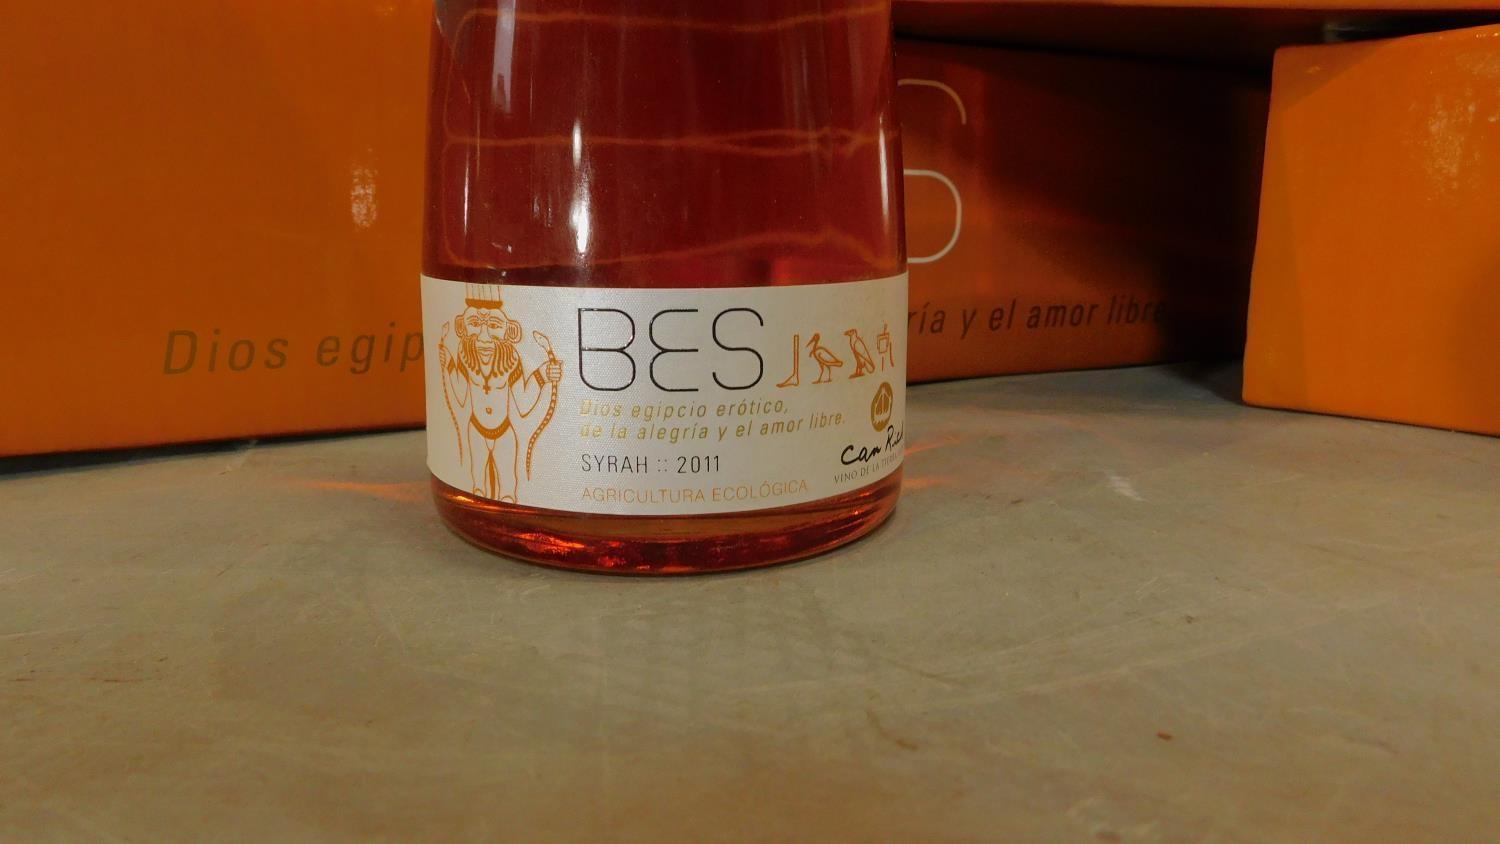 Three half case boxes of BES - Can Rich Syrah 2011 wine. Fuller body strength and taste.(18 bottles) - Image 3 of 3